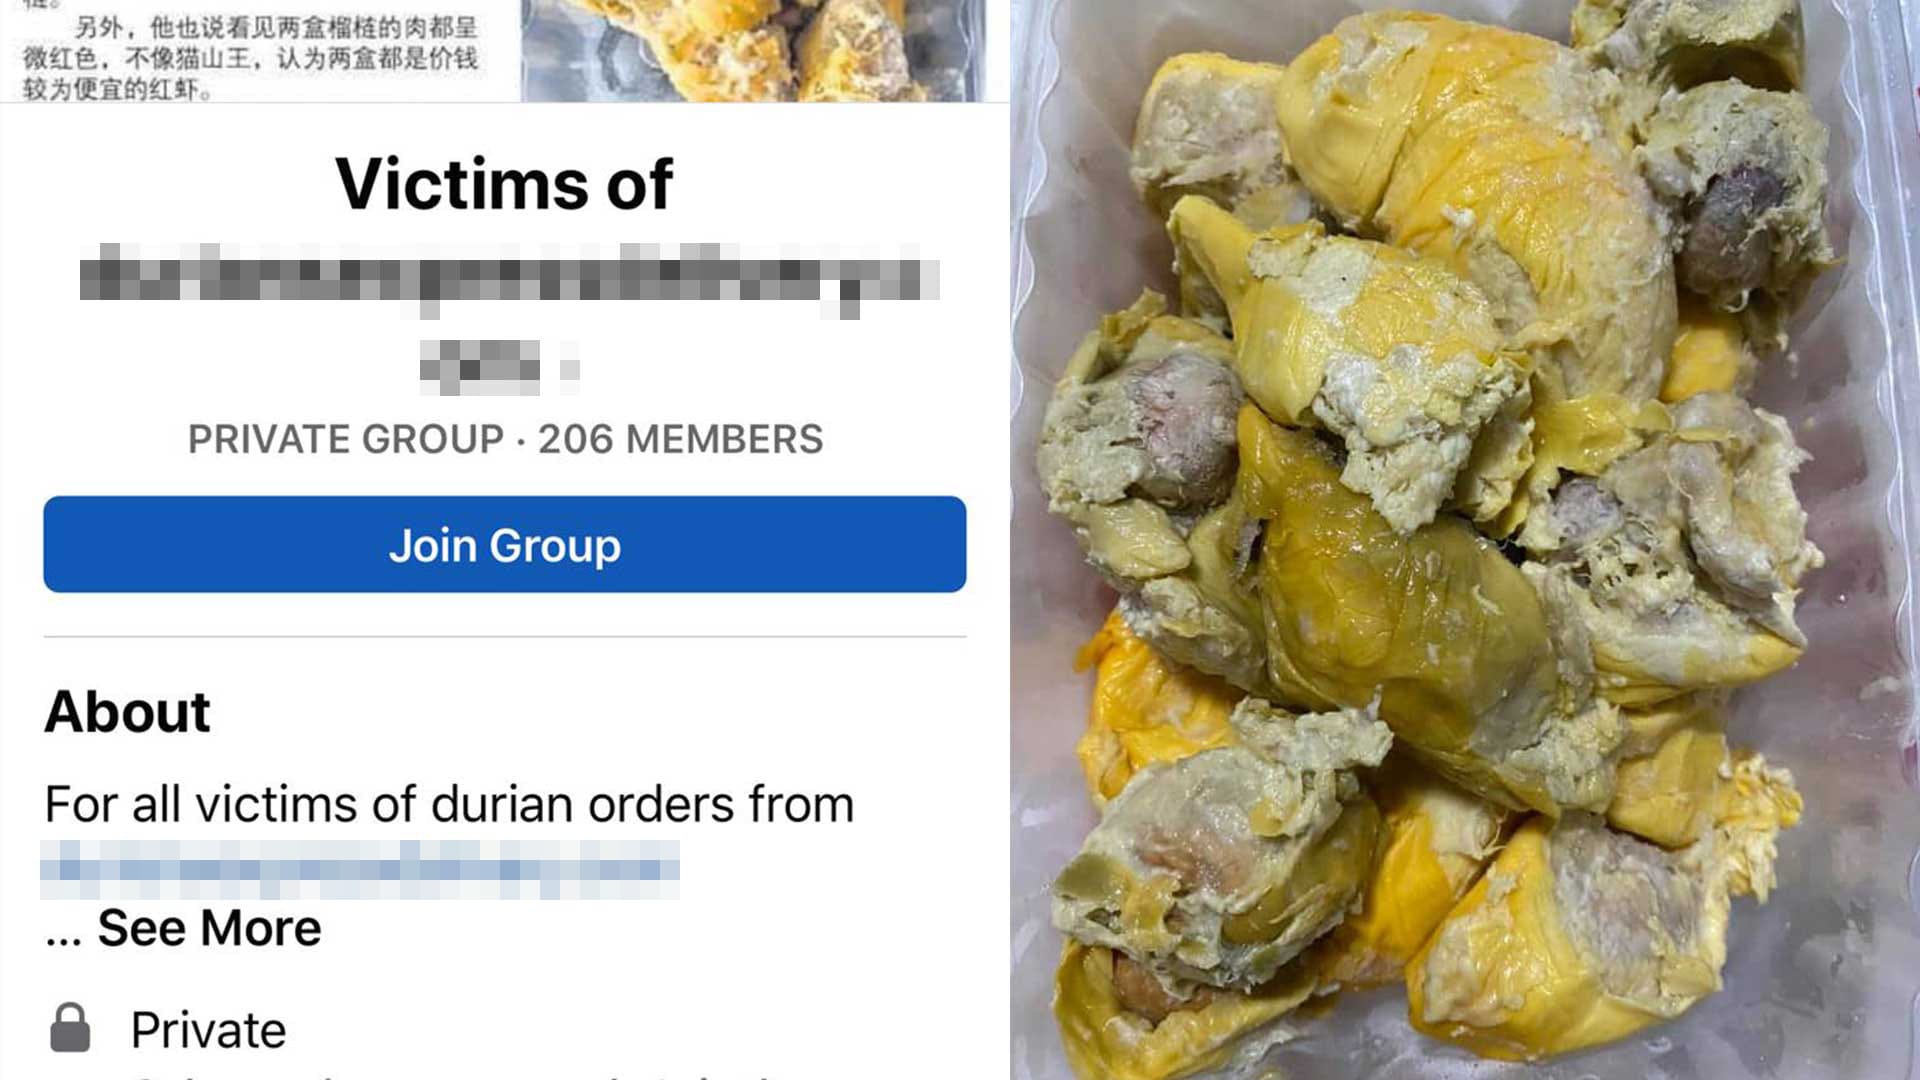 150 People File Police Report Against Durian Shop, Form FB Support Group